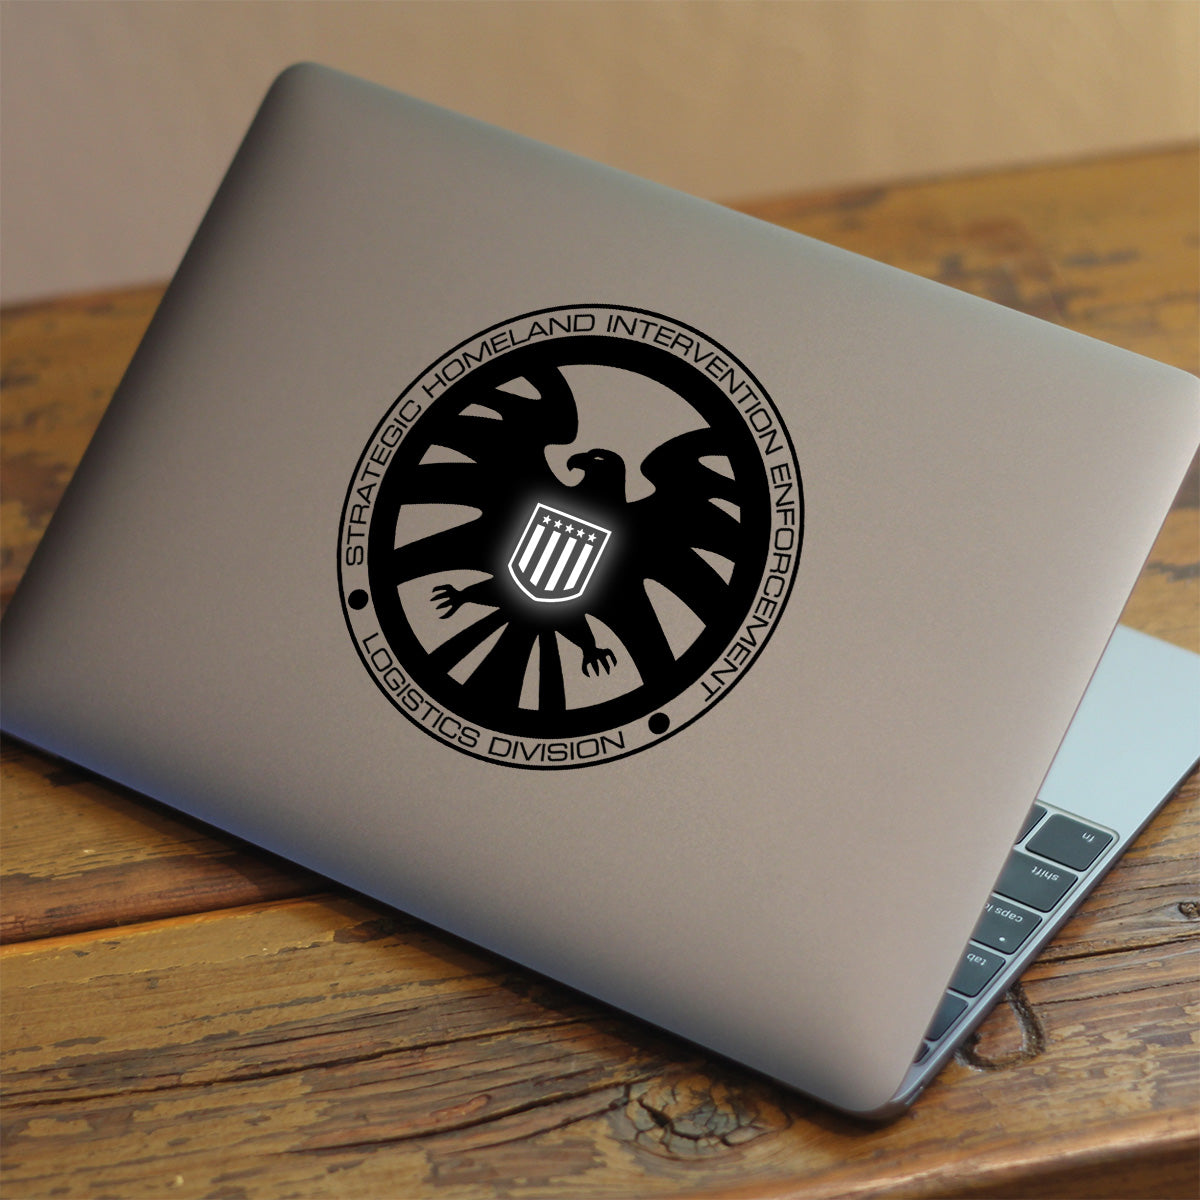 Agents of Shield Macbook Decal